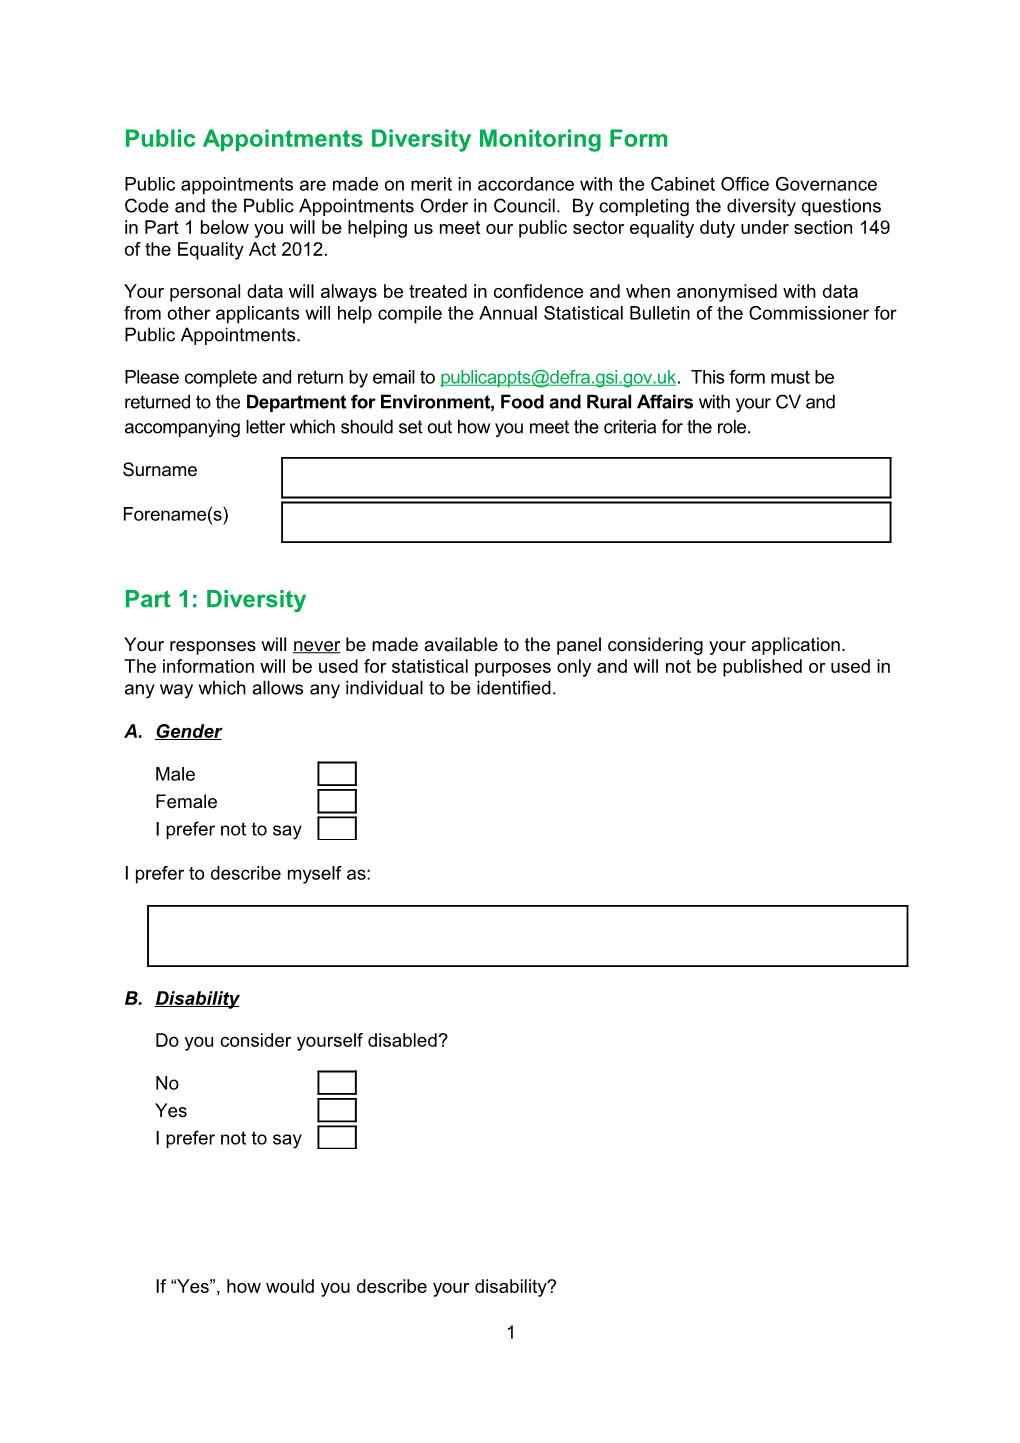 Public Appointments Diversity Monitoring Form